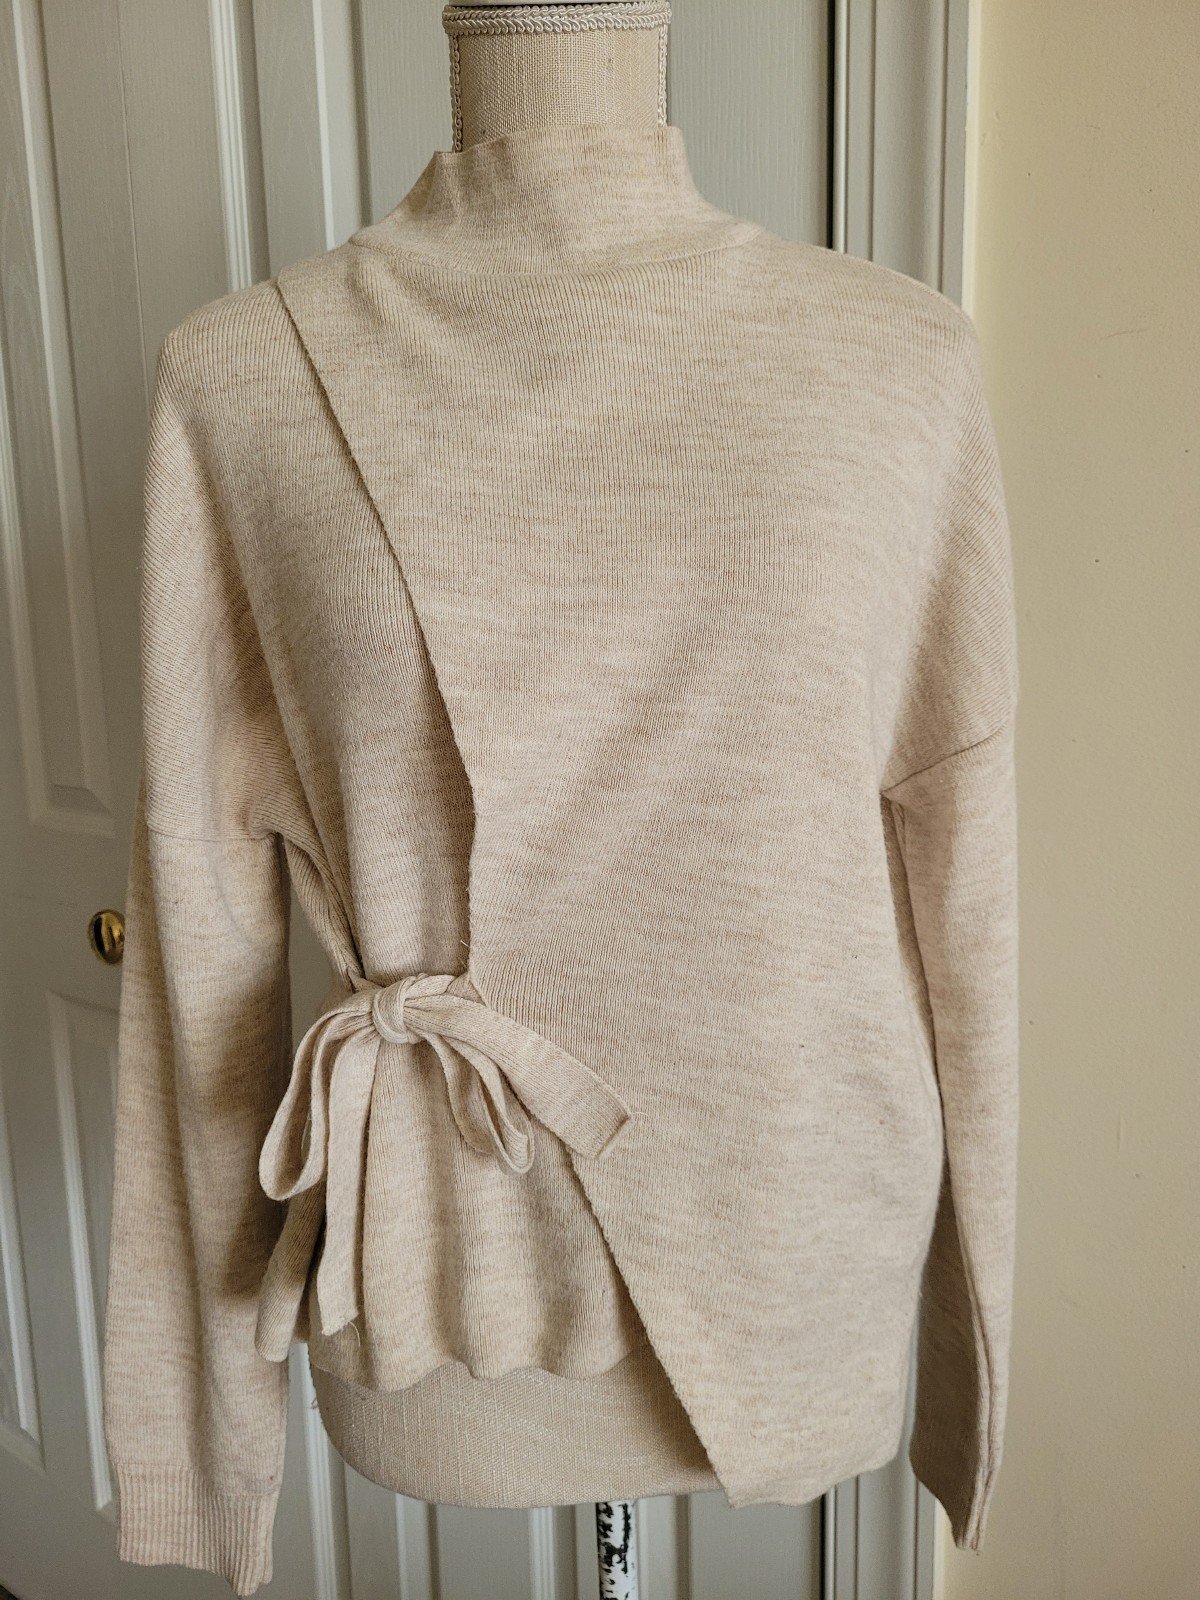 Classic Mango bow wrapped sweater J5DNWFKGf best sale